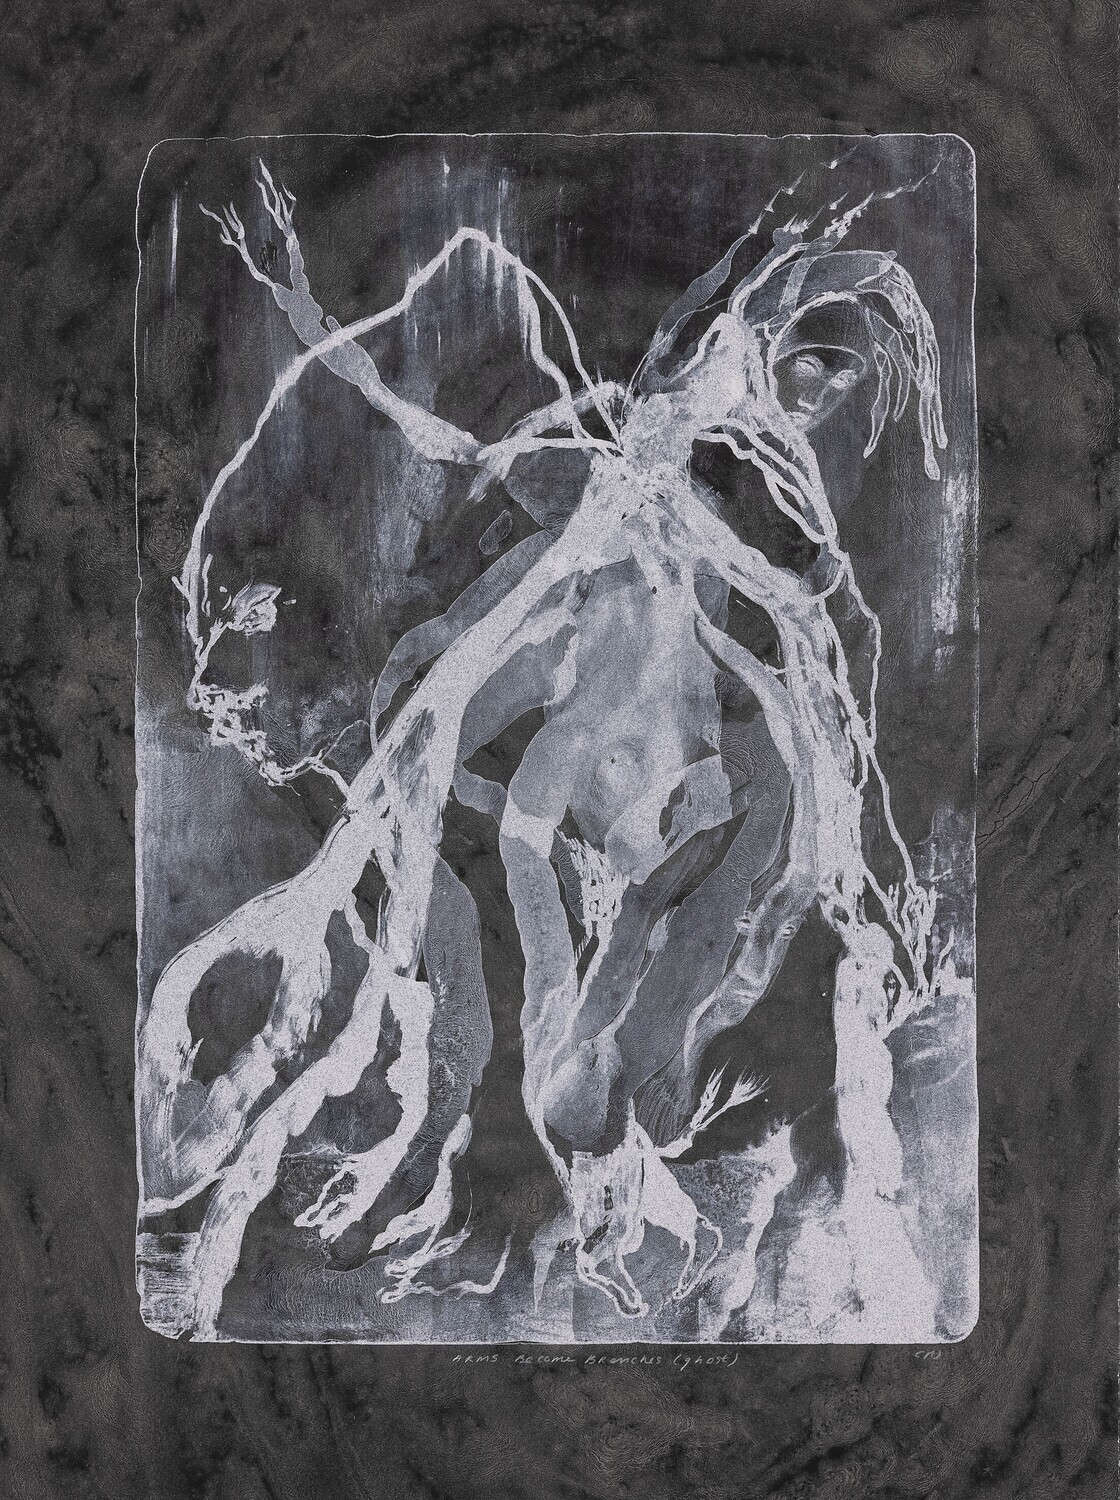 Arms Become Branches (Ghost) - Lithograph